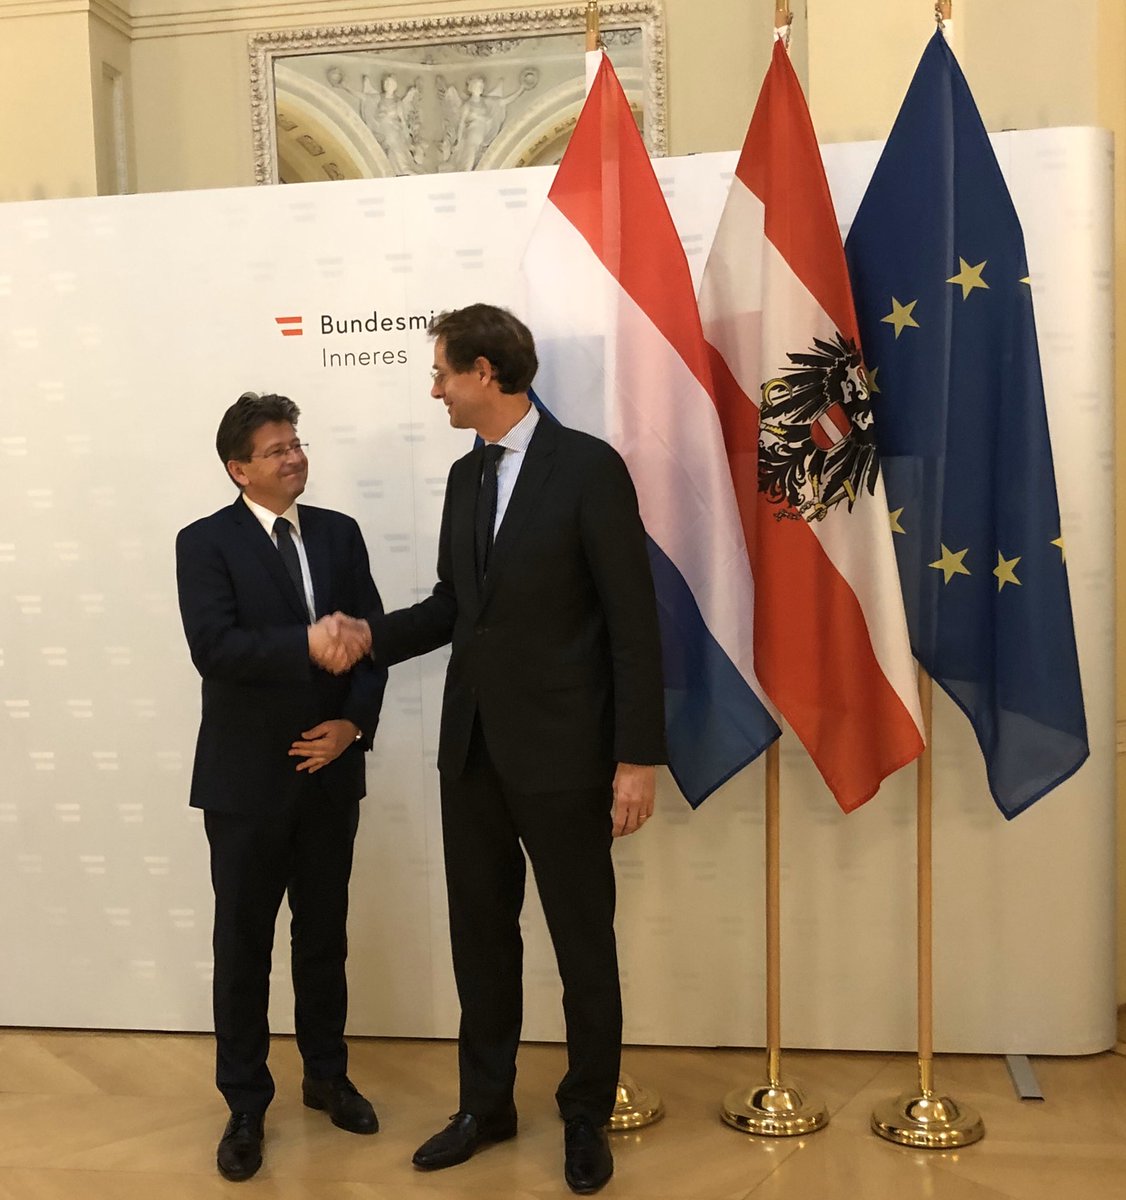 Today Daan Huisinga, Dutch🇳🇱 deputy Director General on International Migration of @ministerieJenV, met with Wolfgang Taucher, Austrian🇦🇹 deputy Director General on Migration and Asylum of @BMI_OE to discuss migration policy ahead of the @ICMPD Conference in Vienna #ViennaMigConf